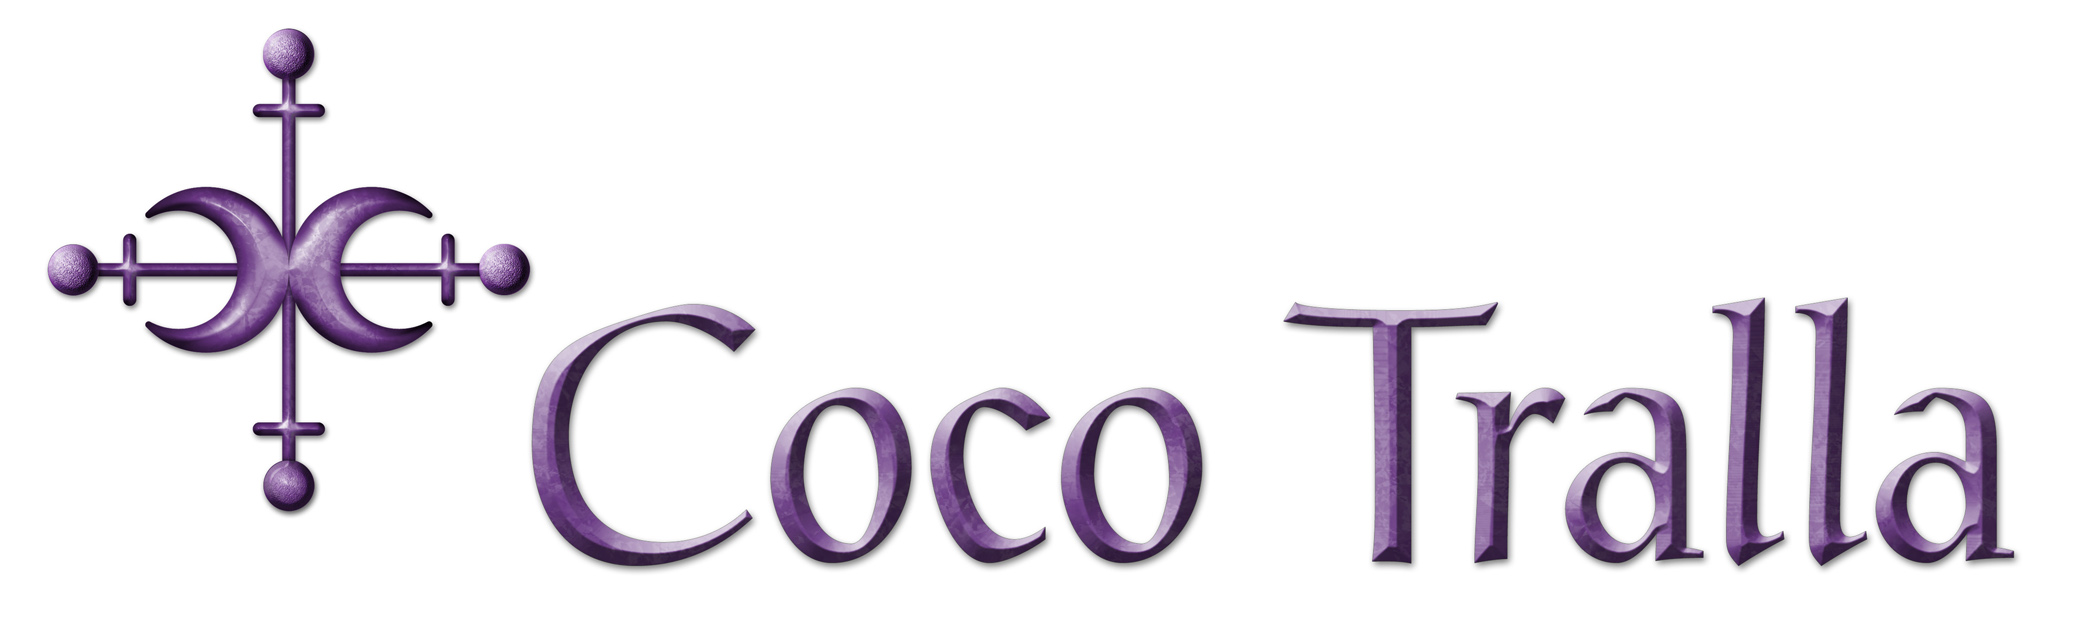 The artwork before the name Coco Tralla is a sigil or an ancient symbol of the Goddess manifest which exists in us all. Coco Tralla LLC plans to reverse an ancient prophecy about the end of the world.